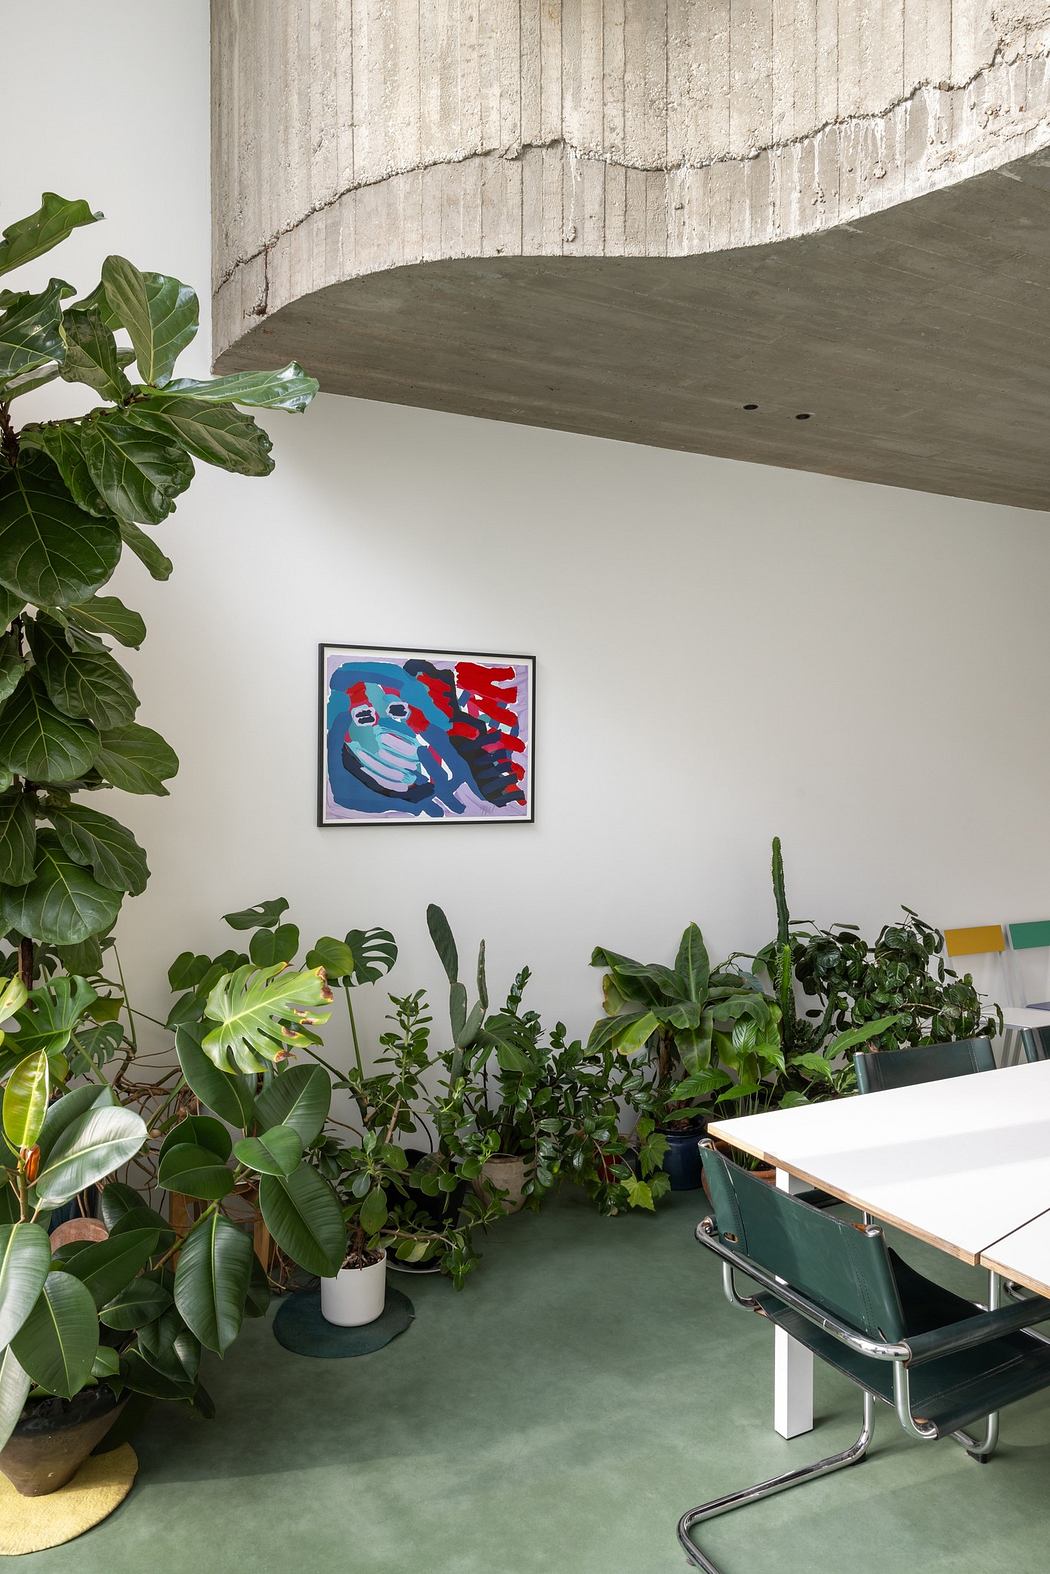 Modern room with plants, artwork, and a ping pong table.